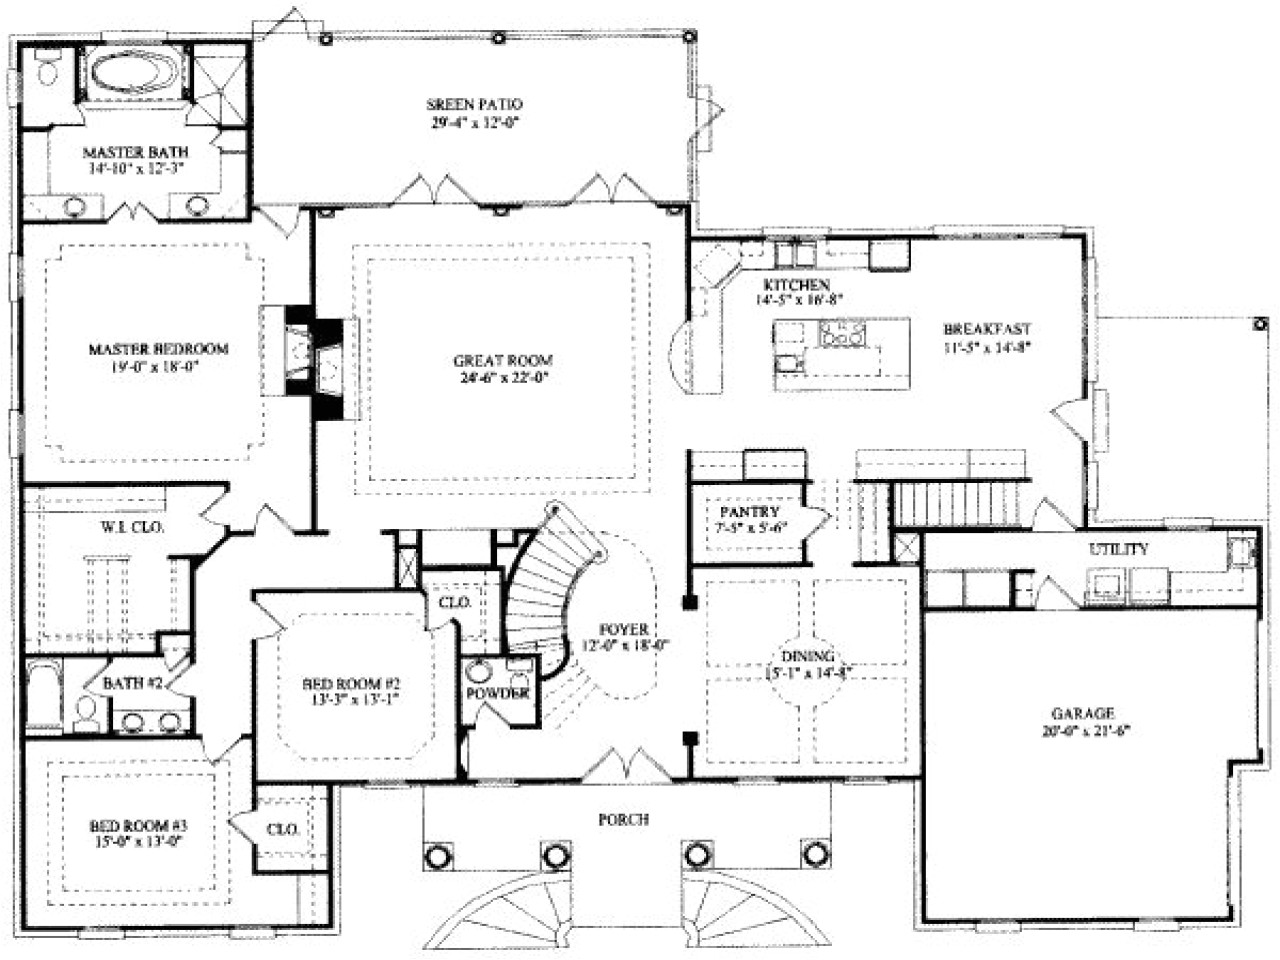 7 Bed House Plans 8 Bedroom Ranch House Plans 7 Bedroom House Floor Plans 7